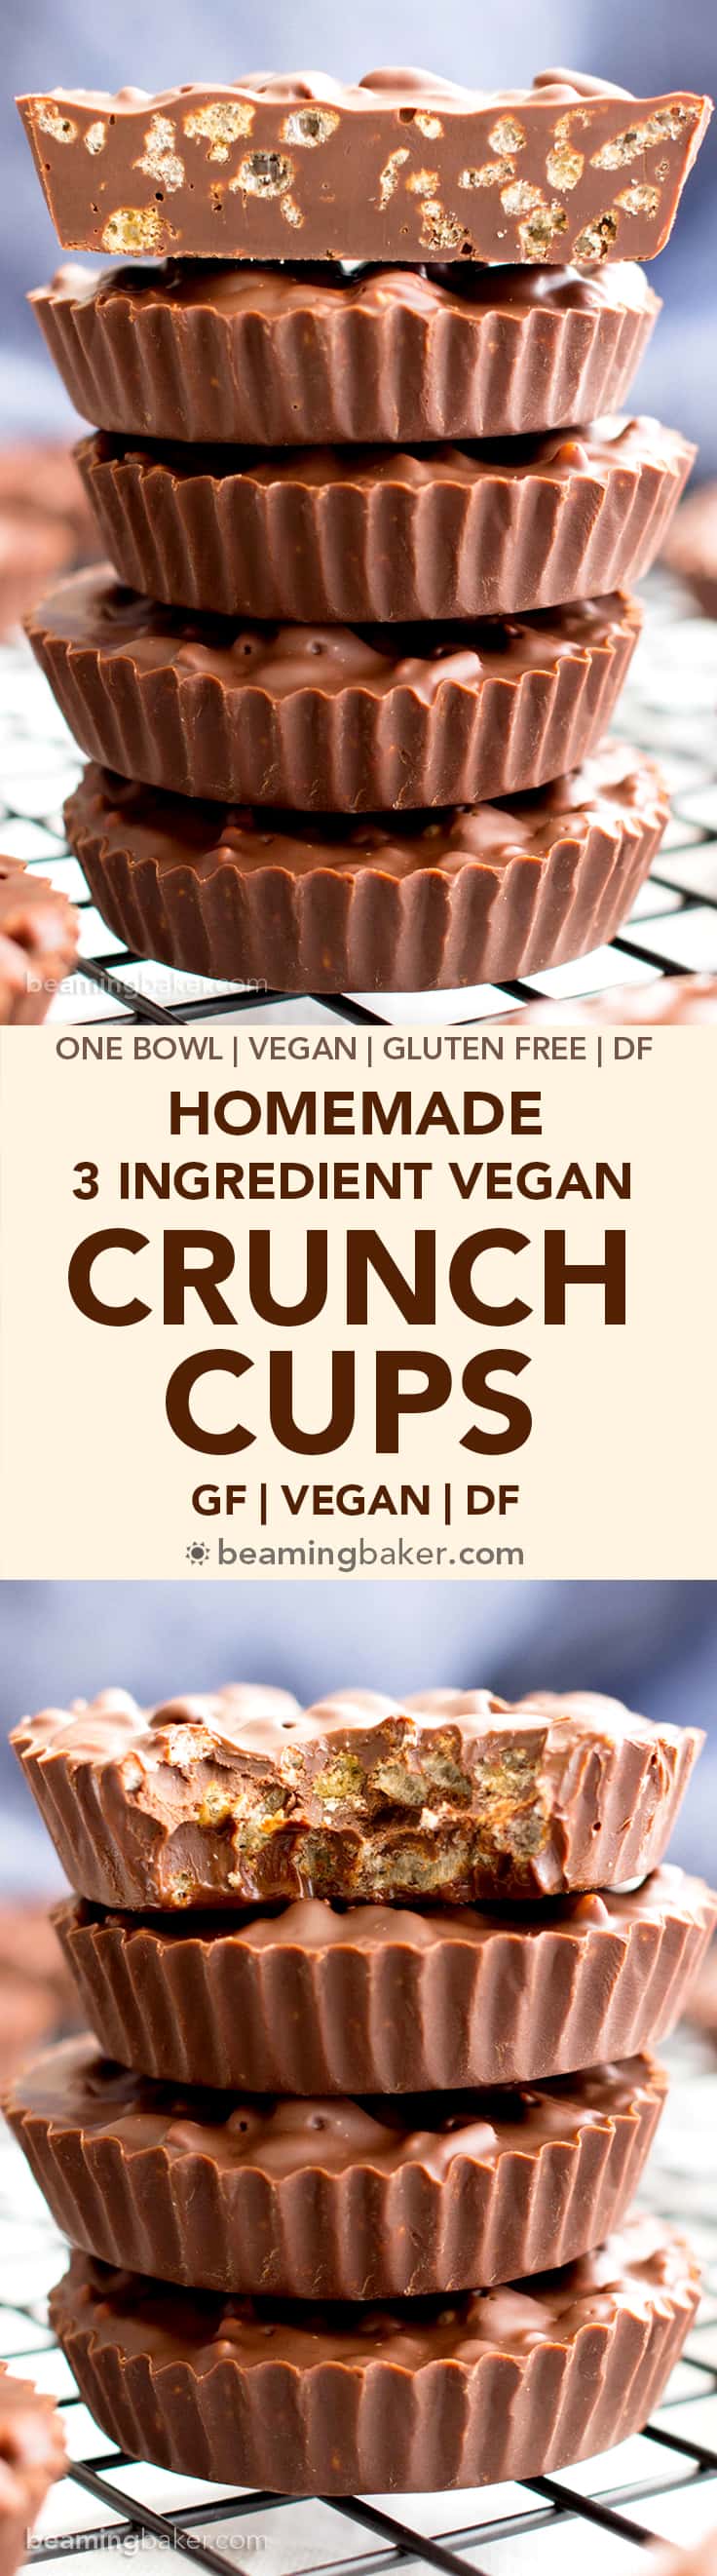 3 Ingredient Homemade Crunch Cups (V, GF): an easy, one bowl recipe for indulgently rich chocolate cups packed with crisp rice cereal. #Vegan #GlutenFree #OneBowl | BeamingBaker.com